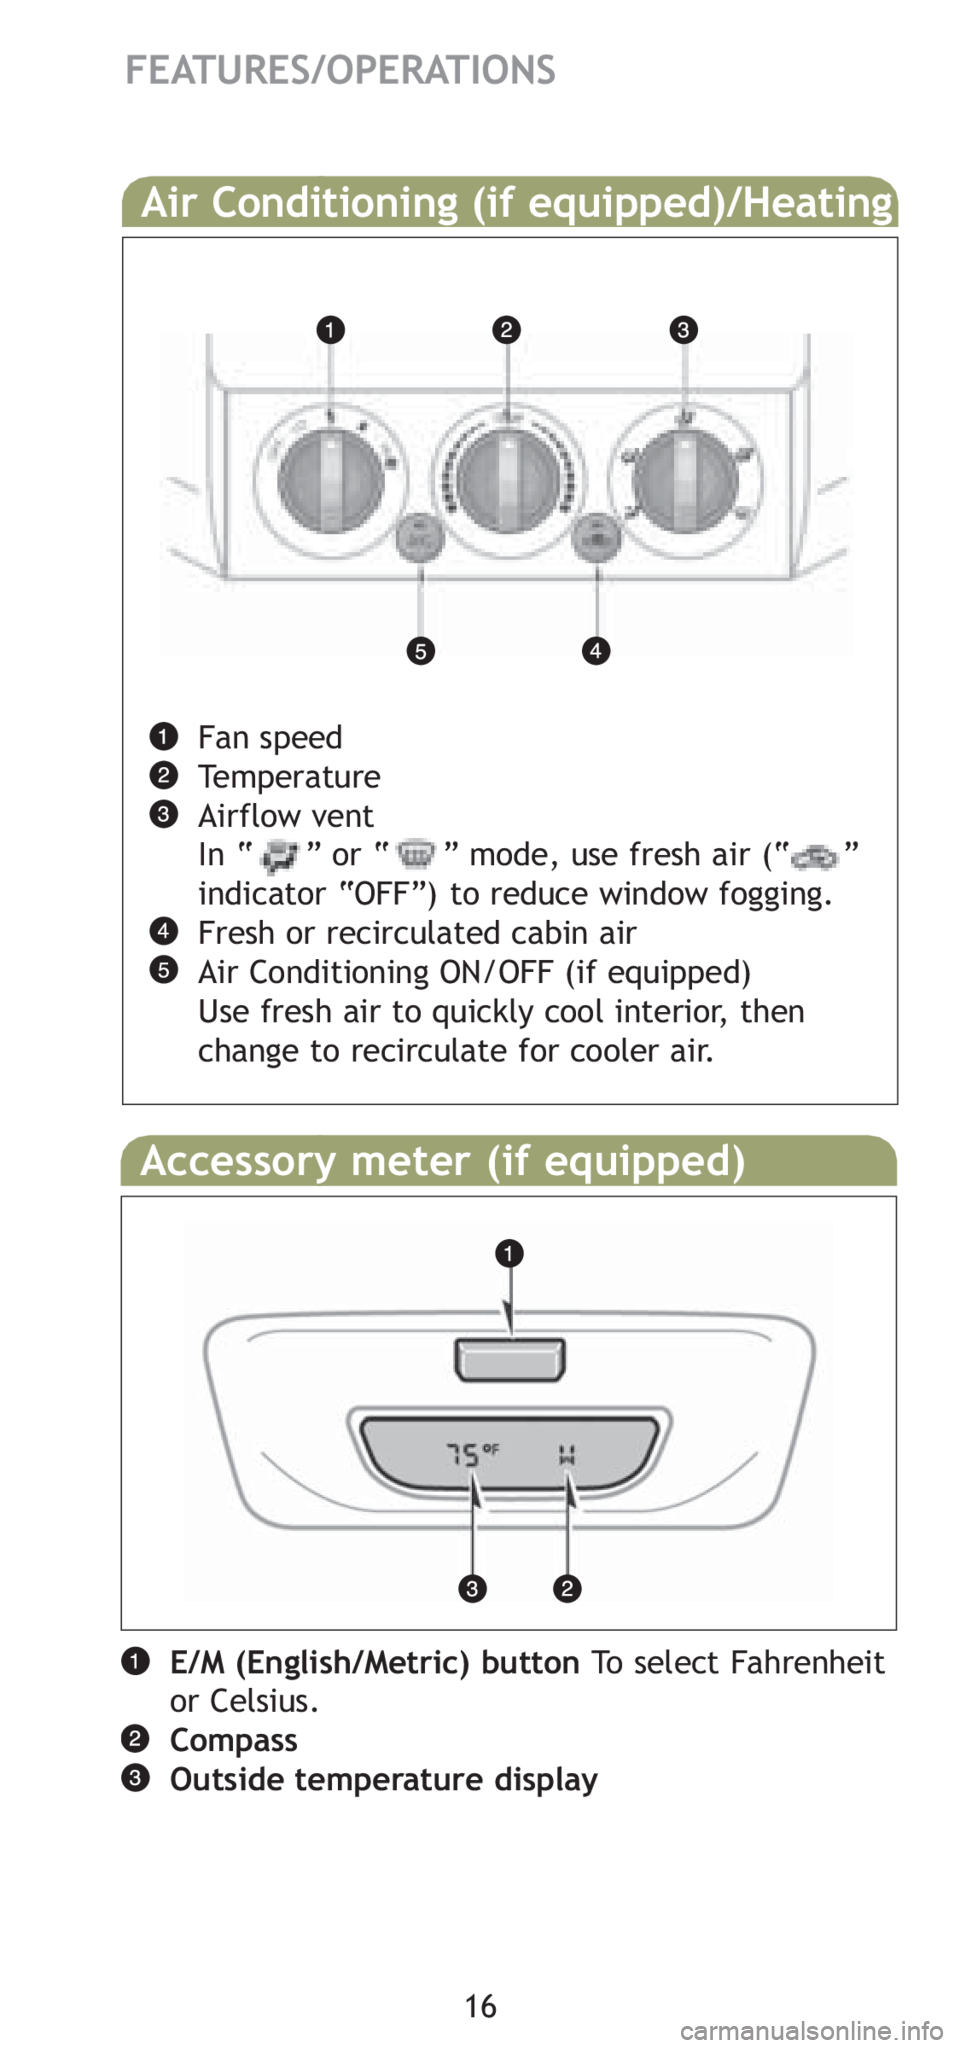 TOYOTA TACOMA 2008   (in English) User Guide 16
FEATURES/OPERATIONS
Air Conditioning (if equipped)/Heating 
Fan speed
Temperature
Airflow vent
In “     ” or “     ” mode, use fresh air (“     ”
indicator “OFF”) to reduce window f